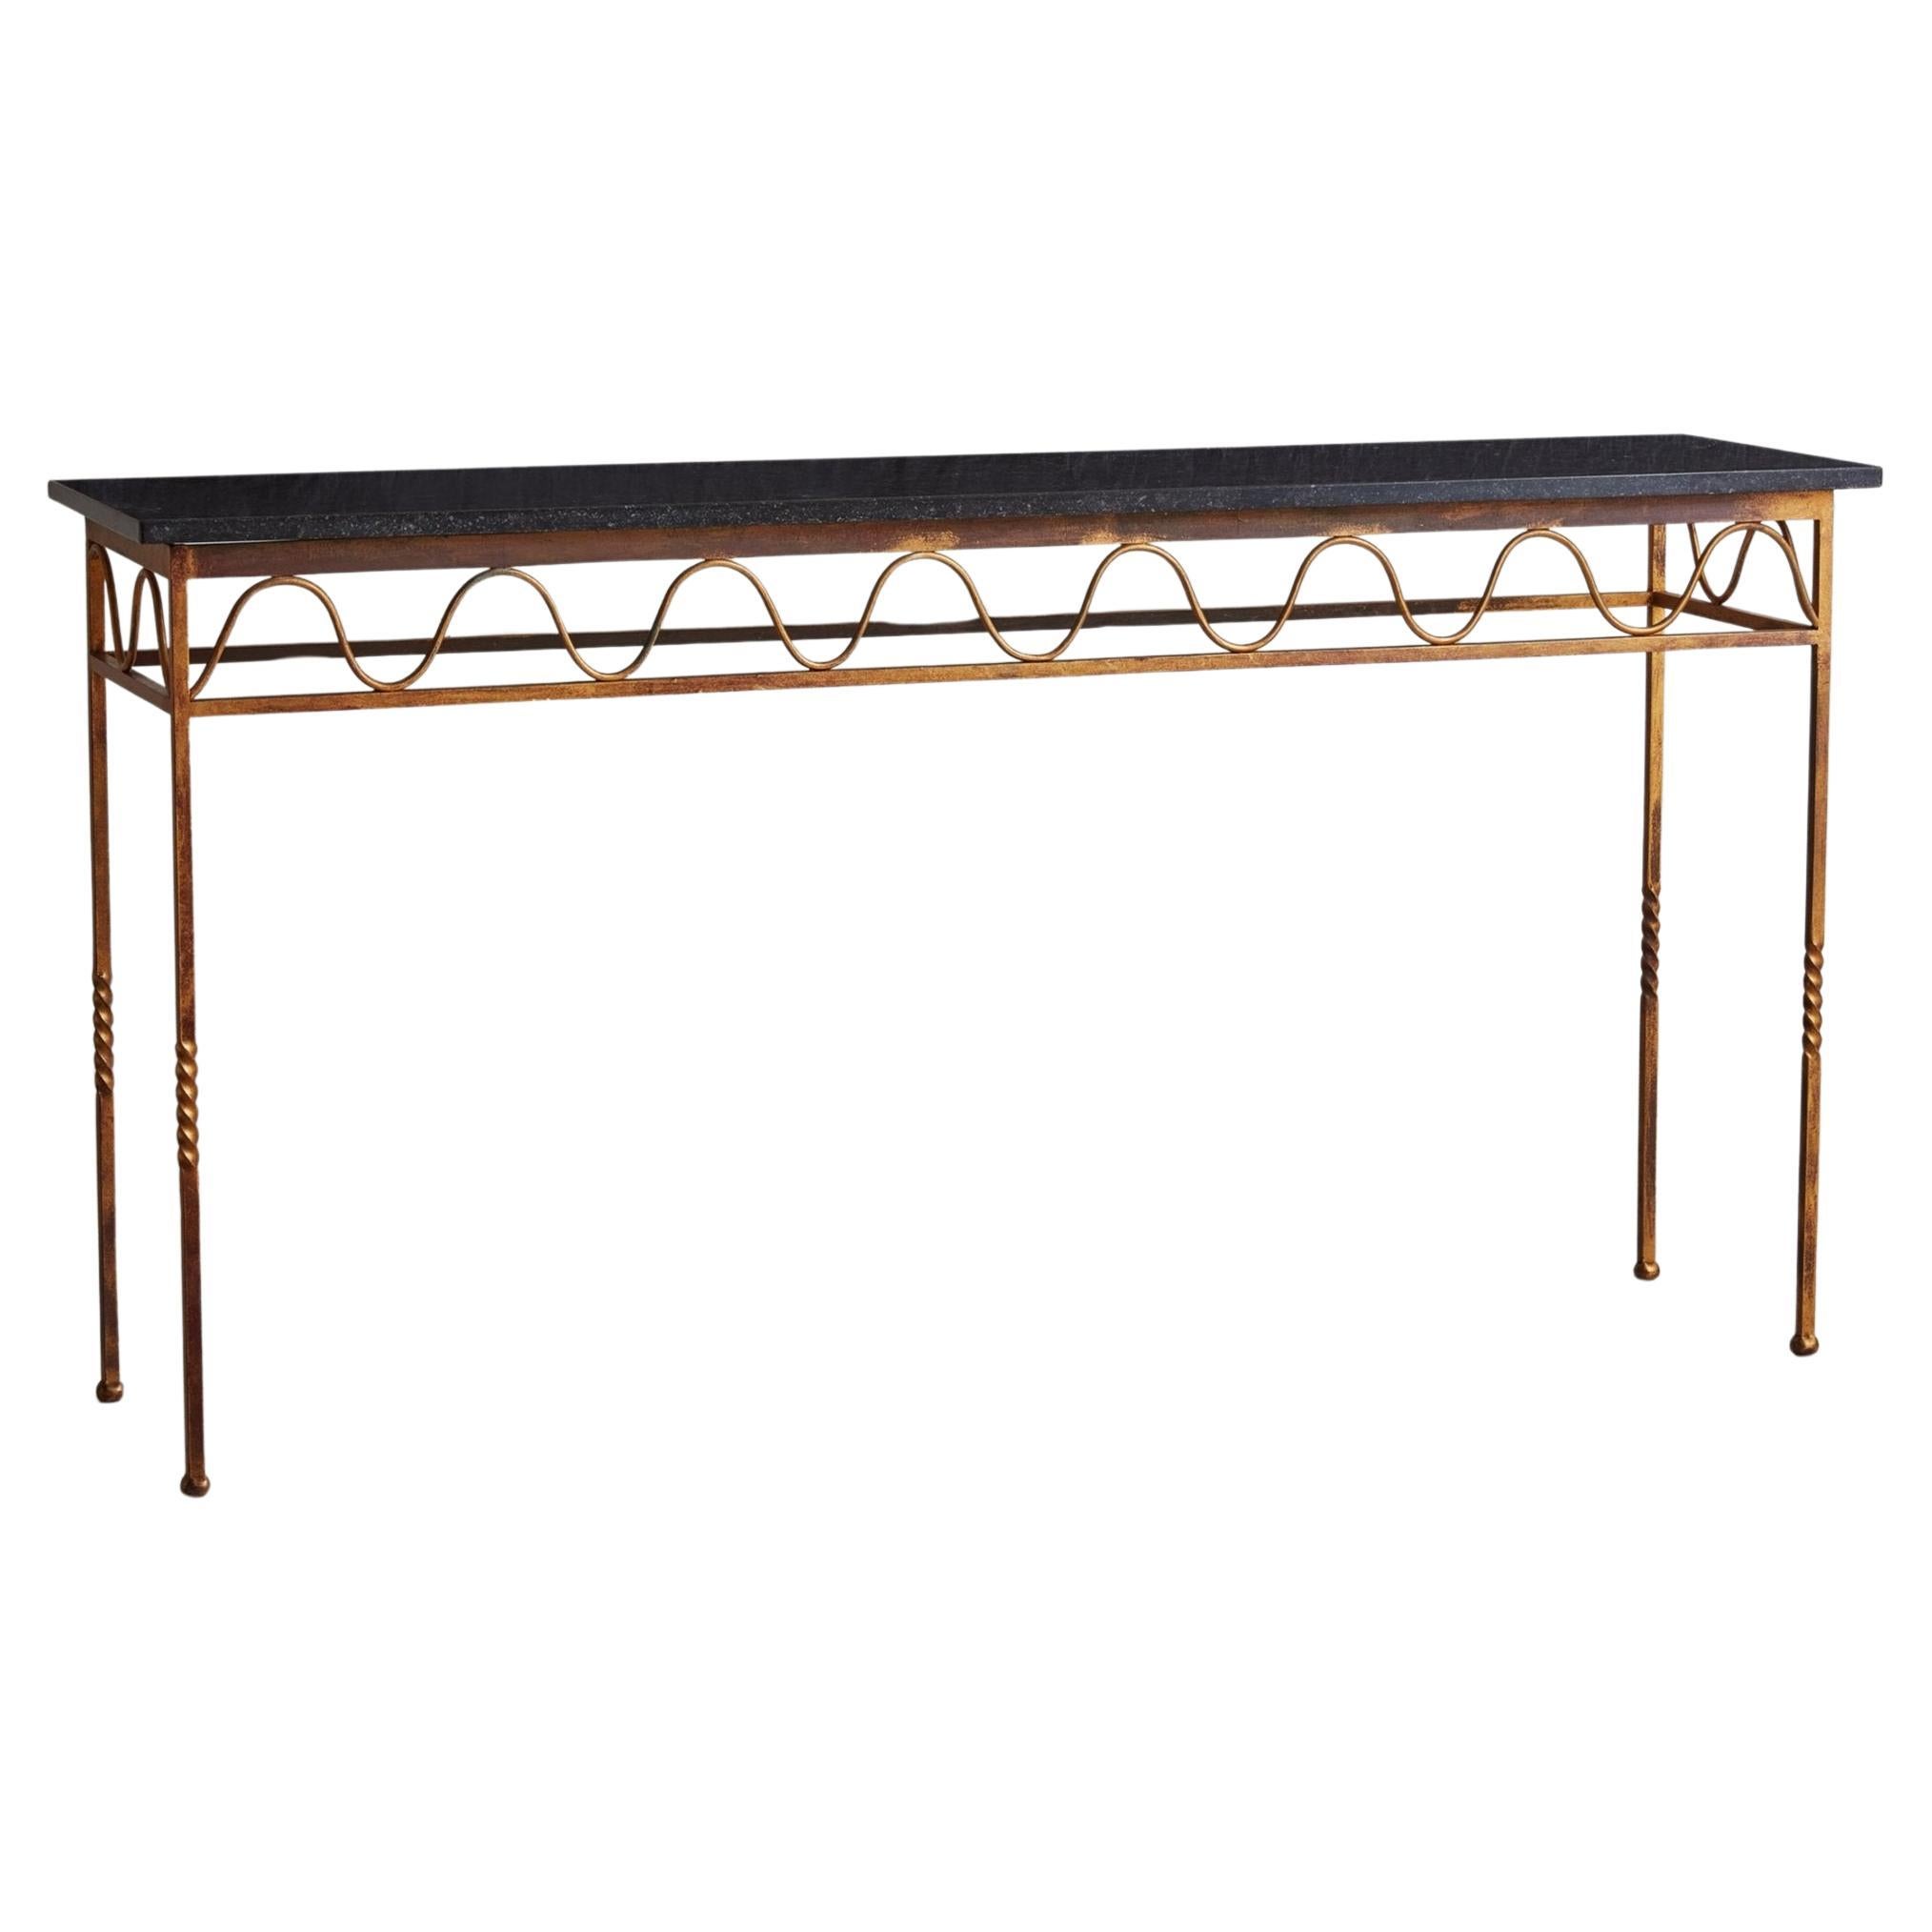 Gilt Iron Squiggle Console Table with Black Marble Top, 1940s For Sale